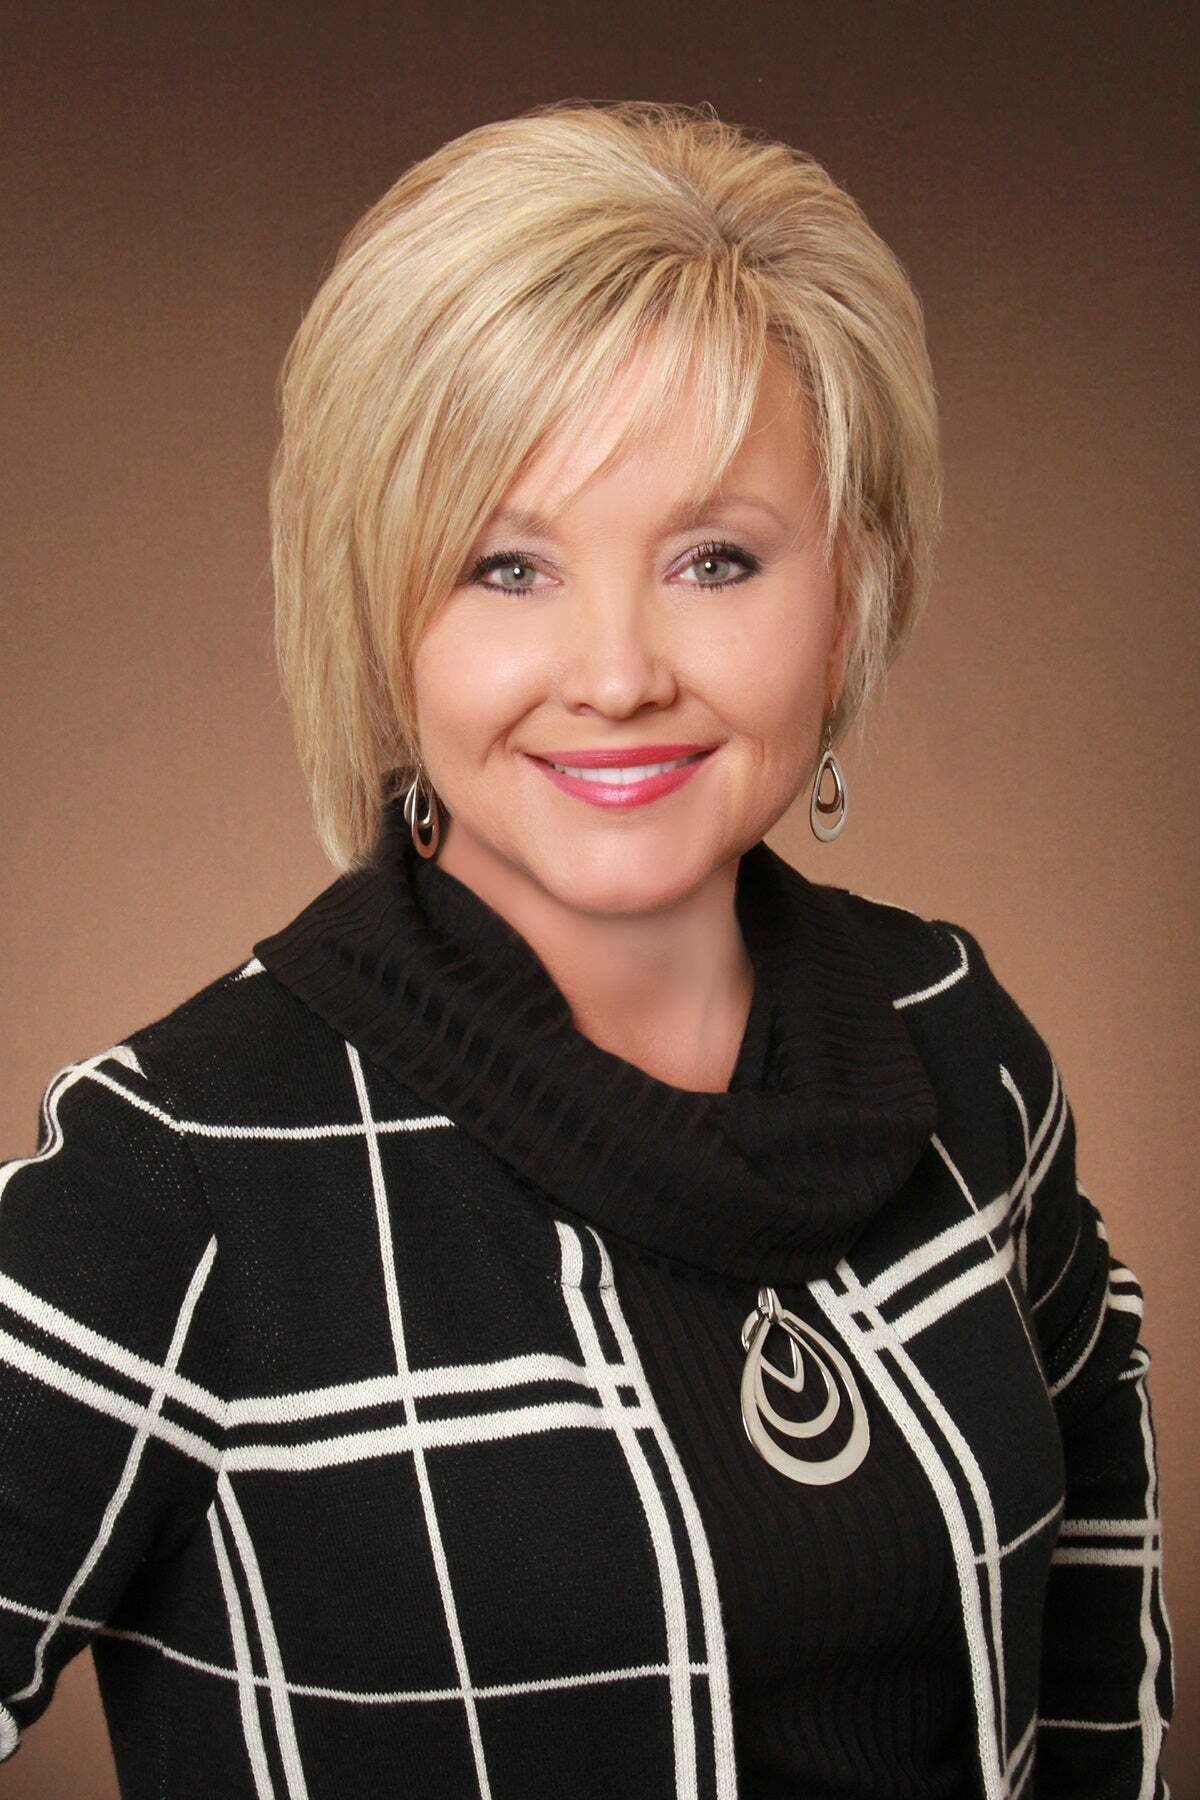 Stacey Comstock, Real Estate Salesperson in Jackson, Premiere Realty